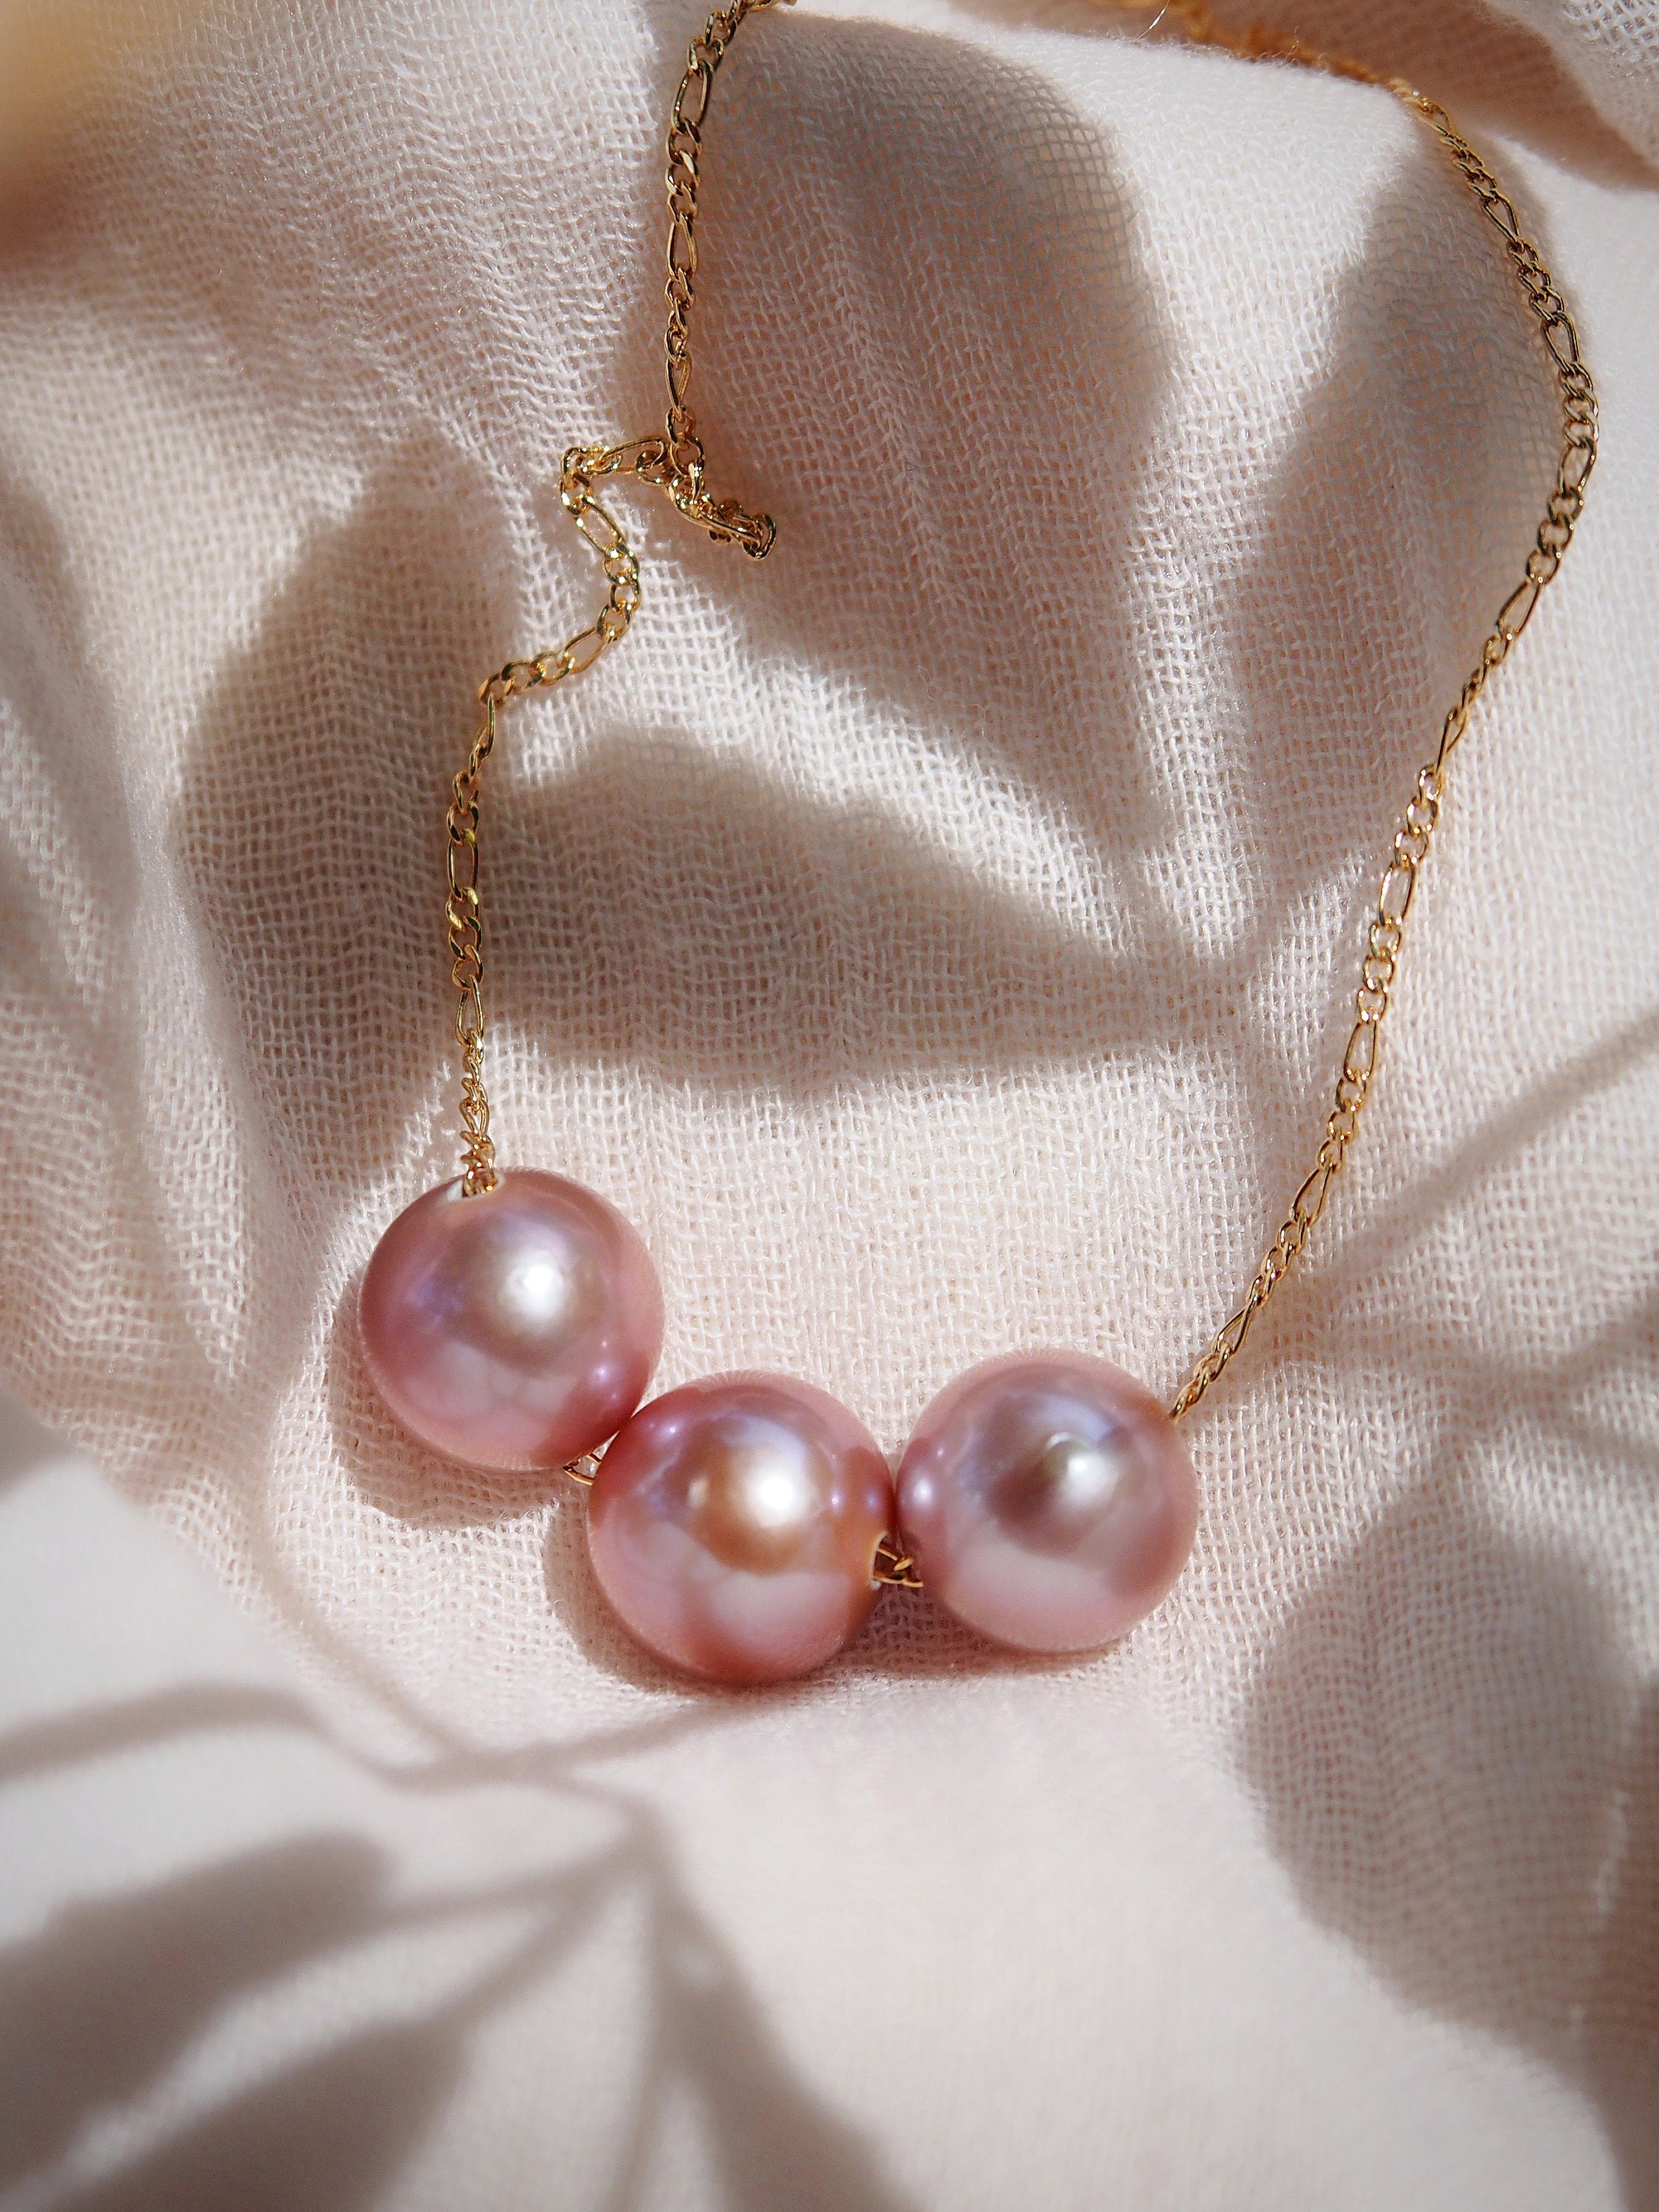 LUXE FLOATING PEARL NECKLACE GF (11MM+ EDISON PEARL) – MAUIME HAWAII